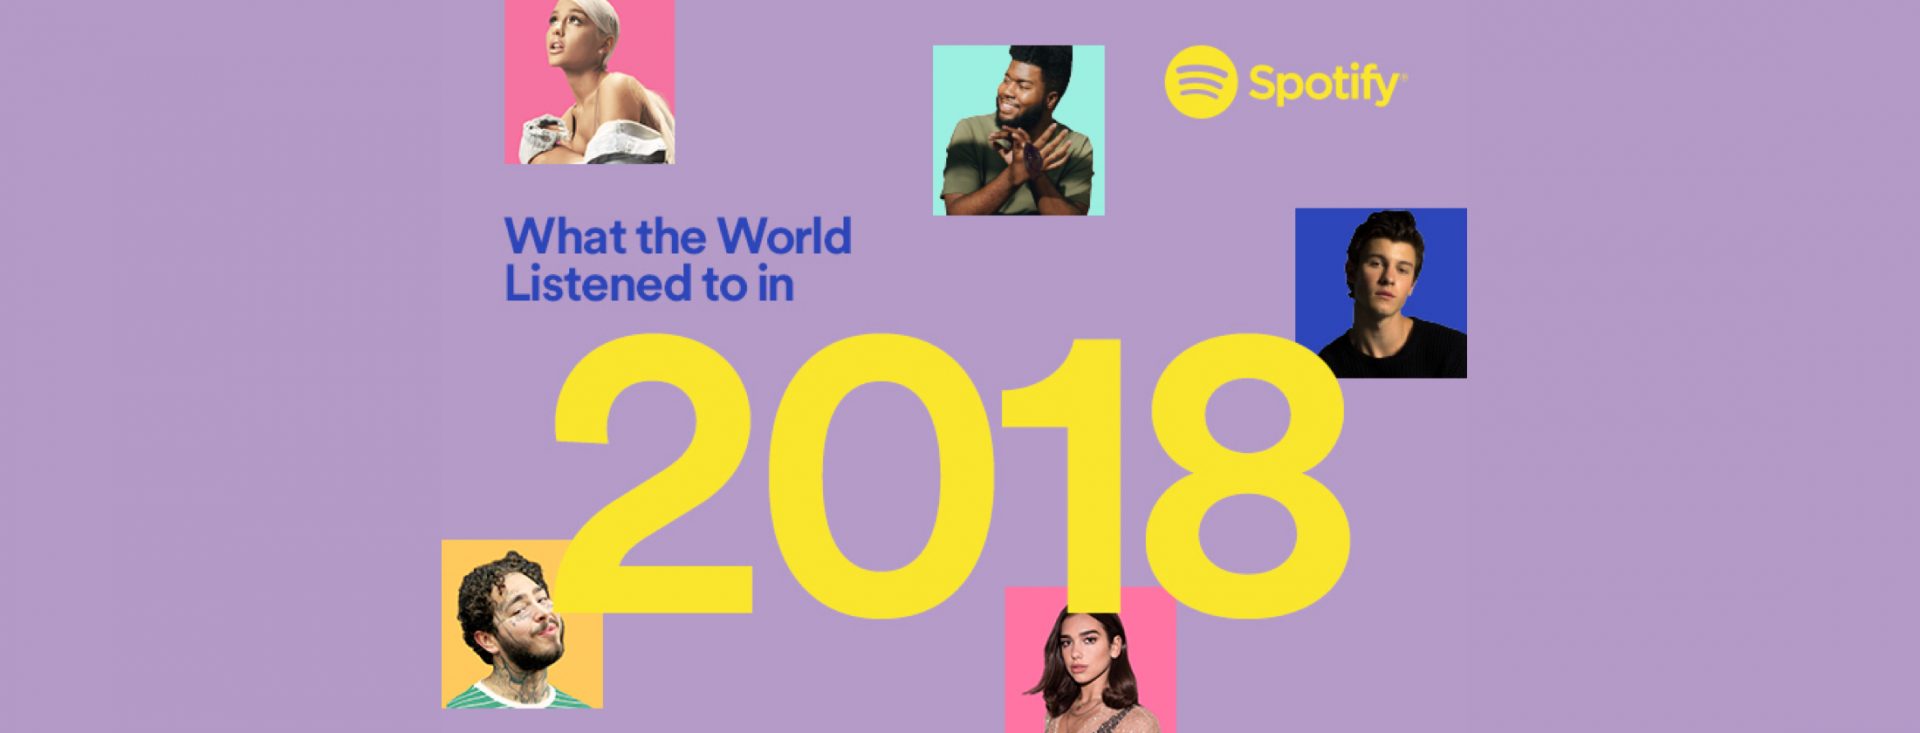 my top 10 spotify artists